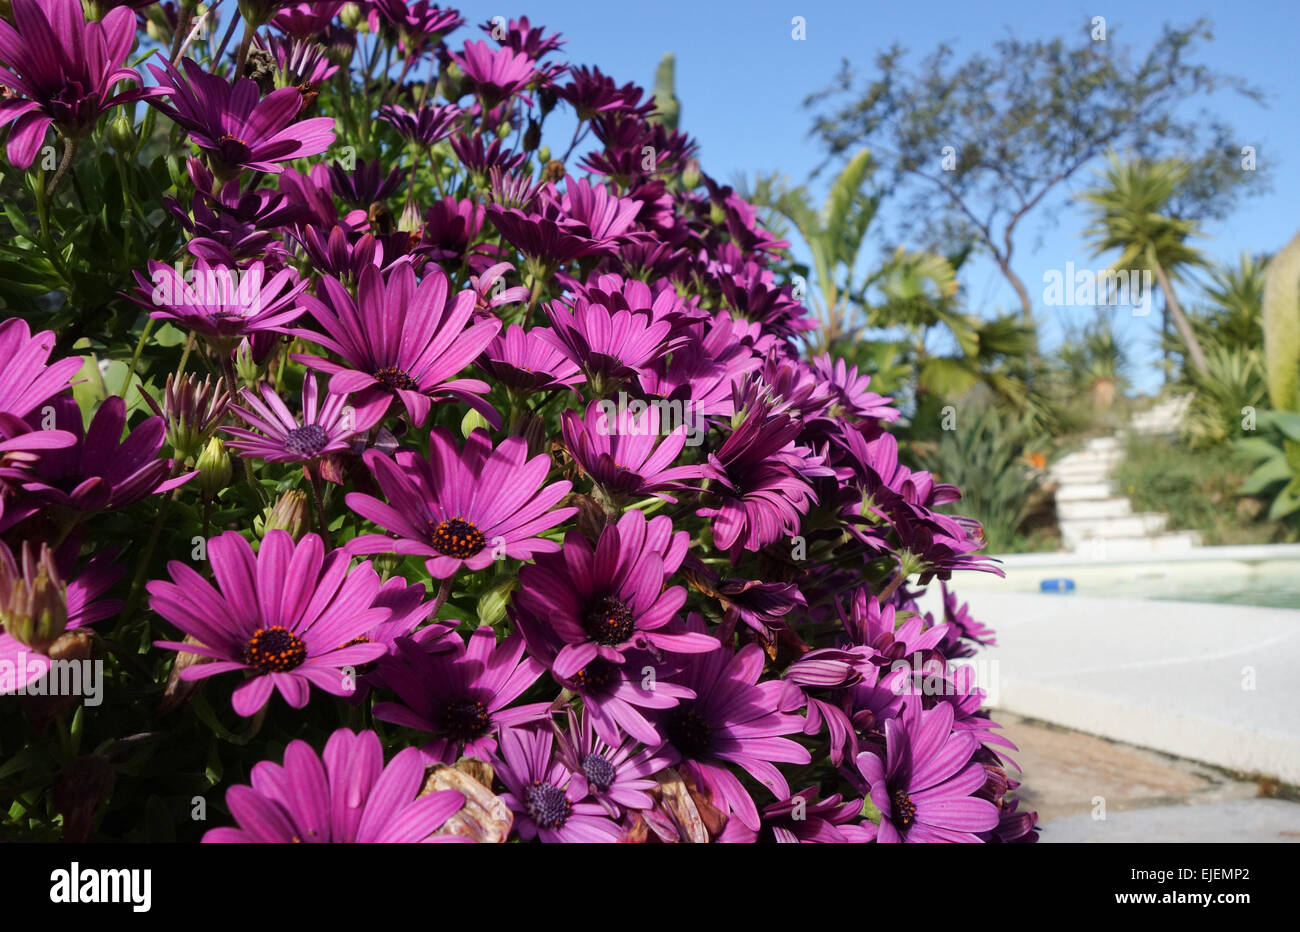 Purple daisies Osteospermum, with pool in background, Southern Spain. Stock Photo